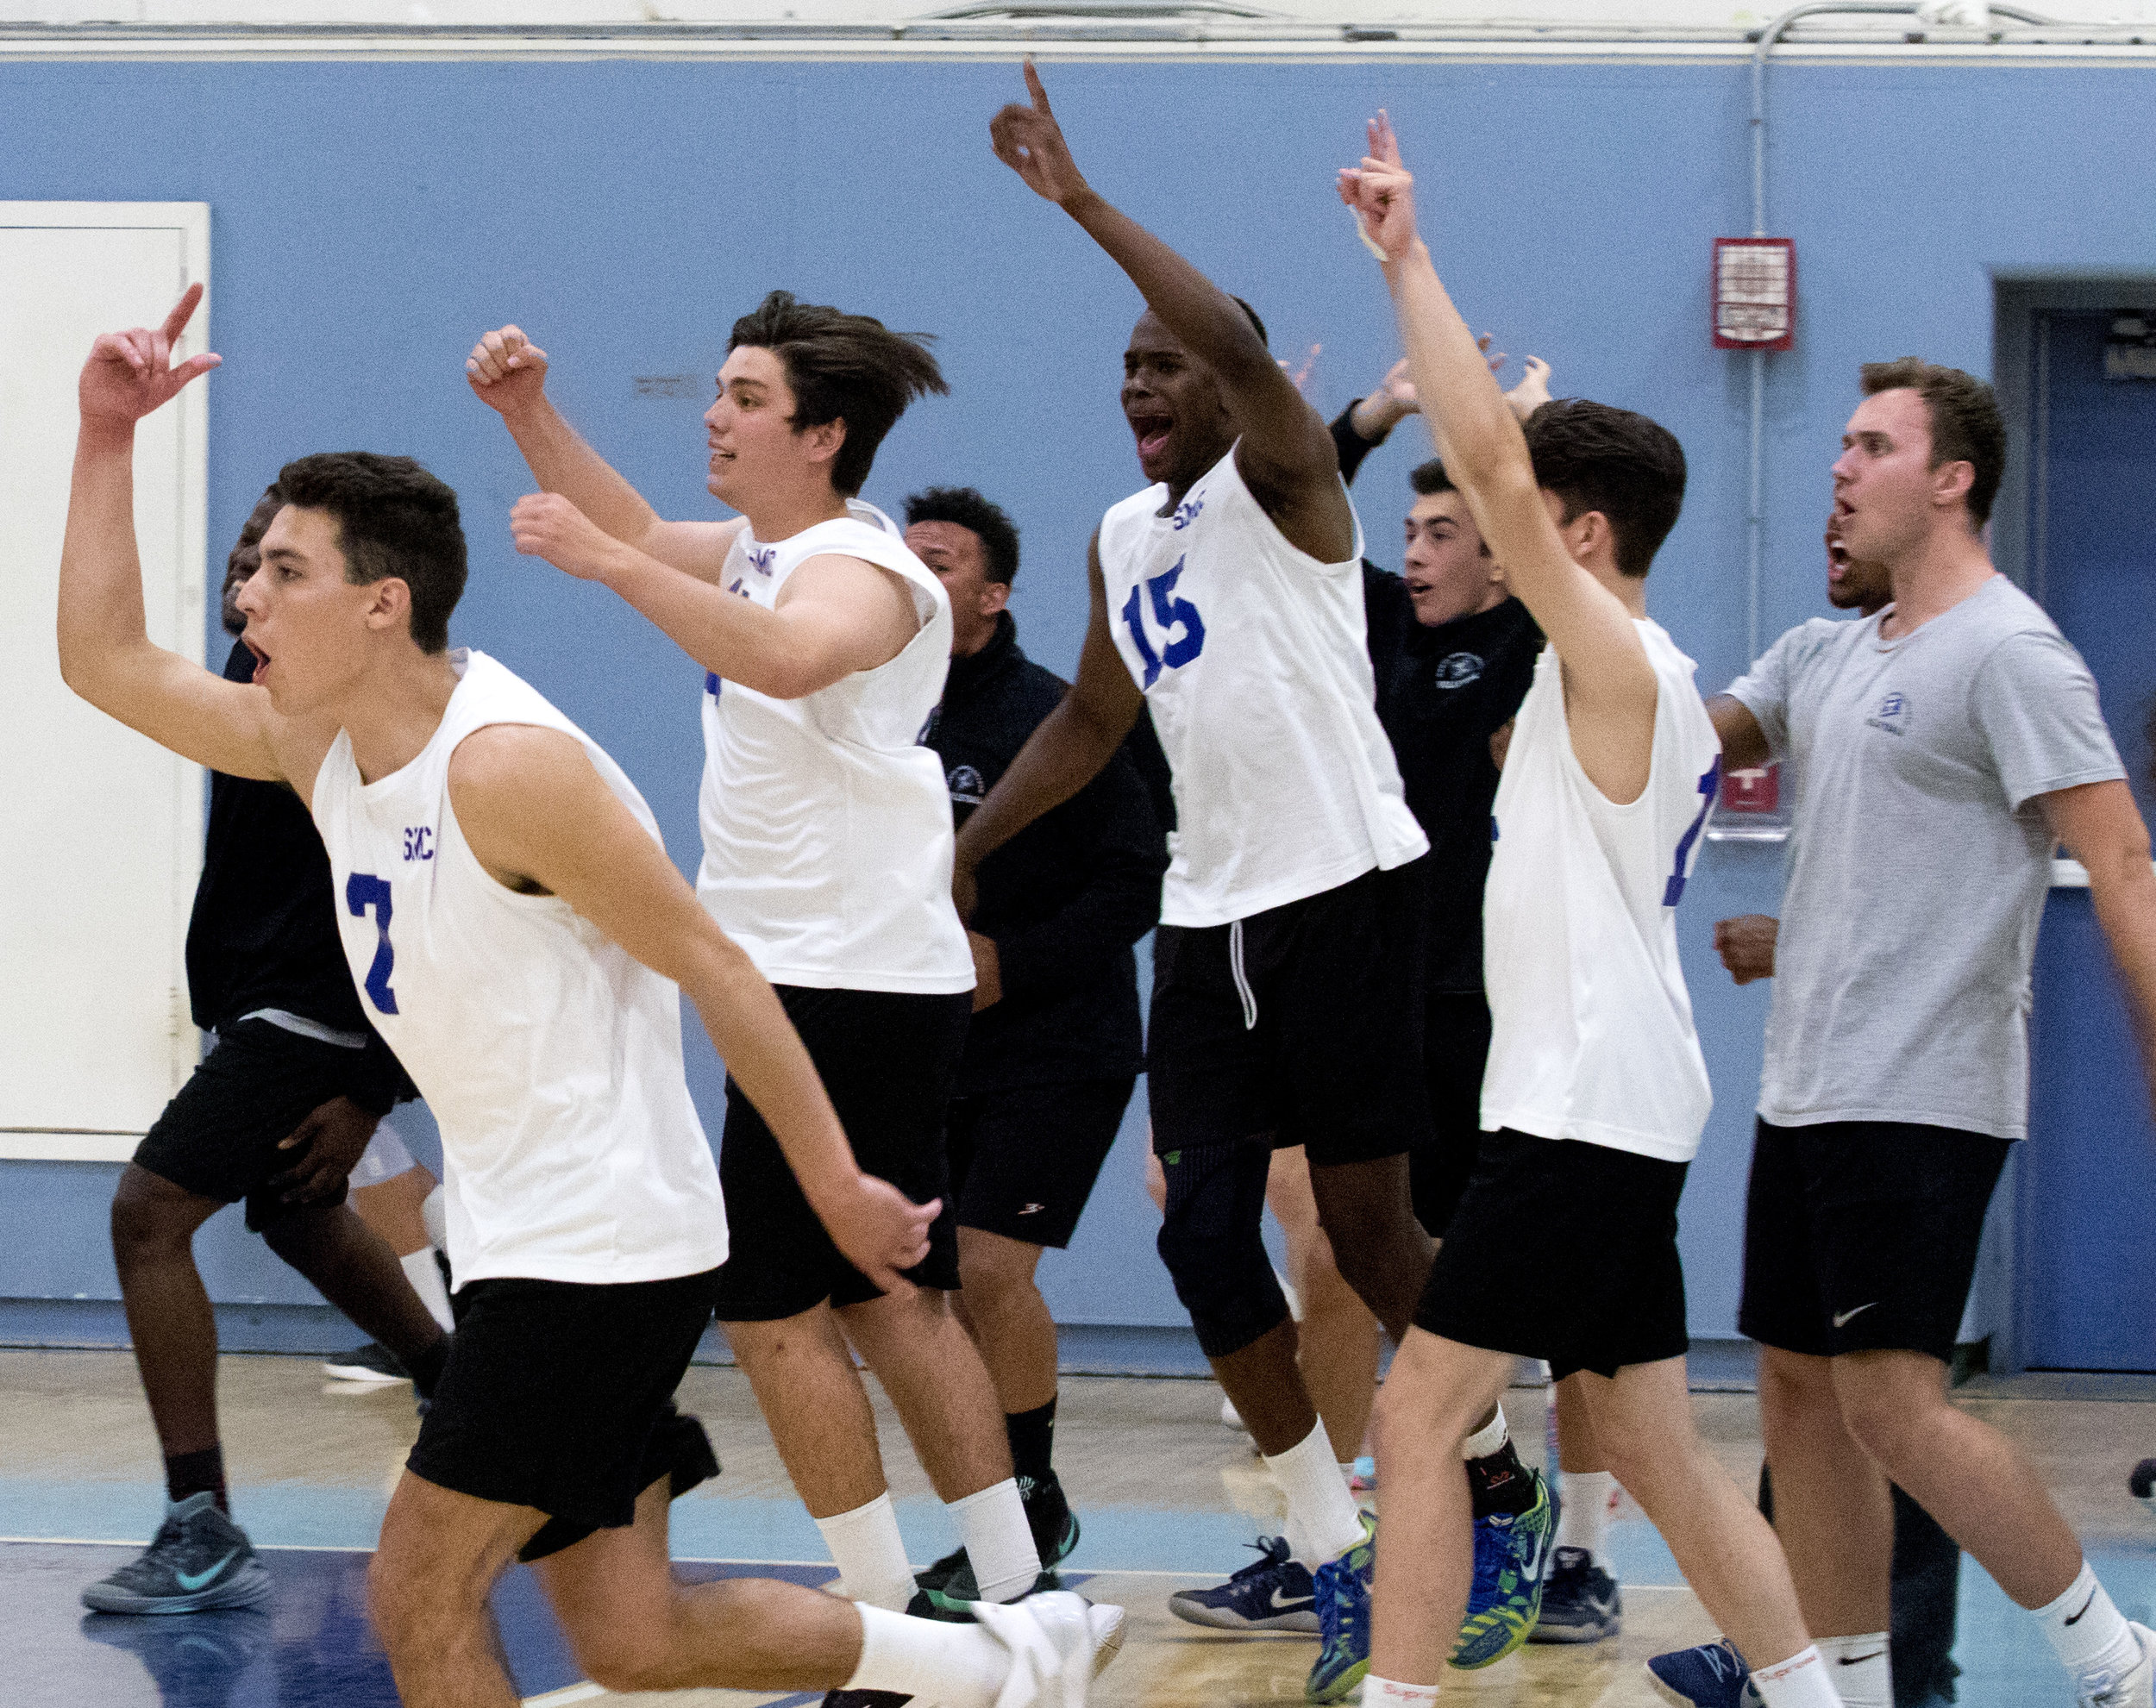  The Santa Monica College Corsairs bench rushes the court in celebration as the Corsairs win the match 3-2 against Pierce College Brahmas on April 21, 2017 at the Santa Monica Gymnasium at Santa Monica College in Santa Monica California (Photo By: Za